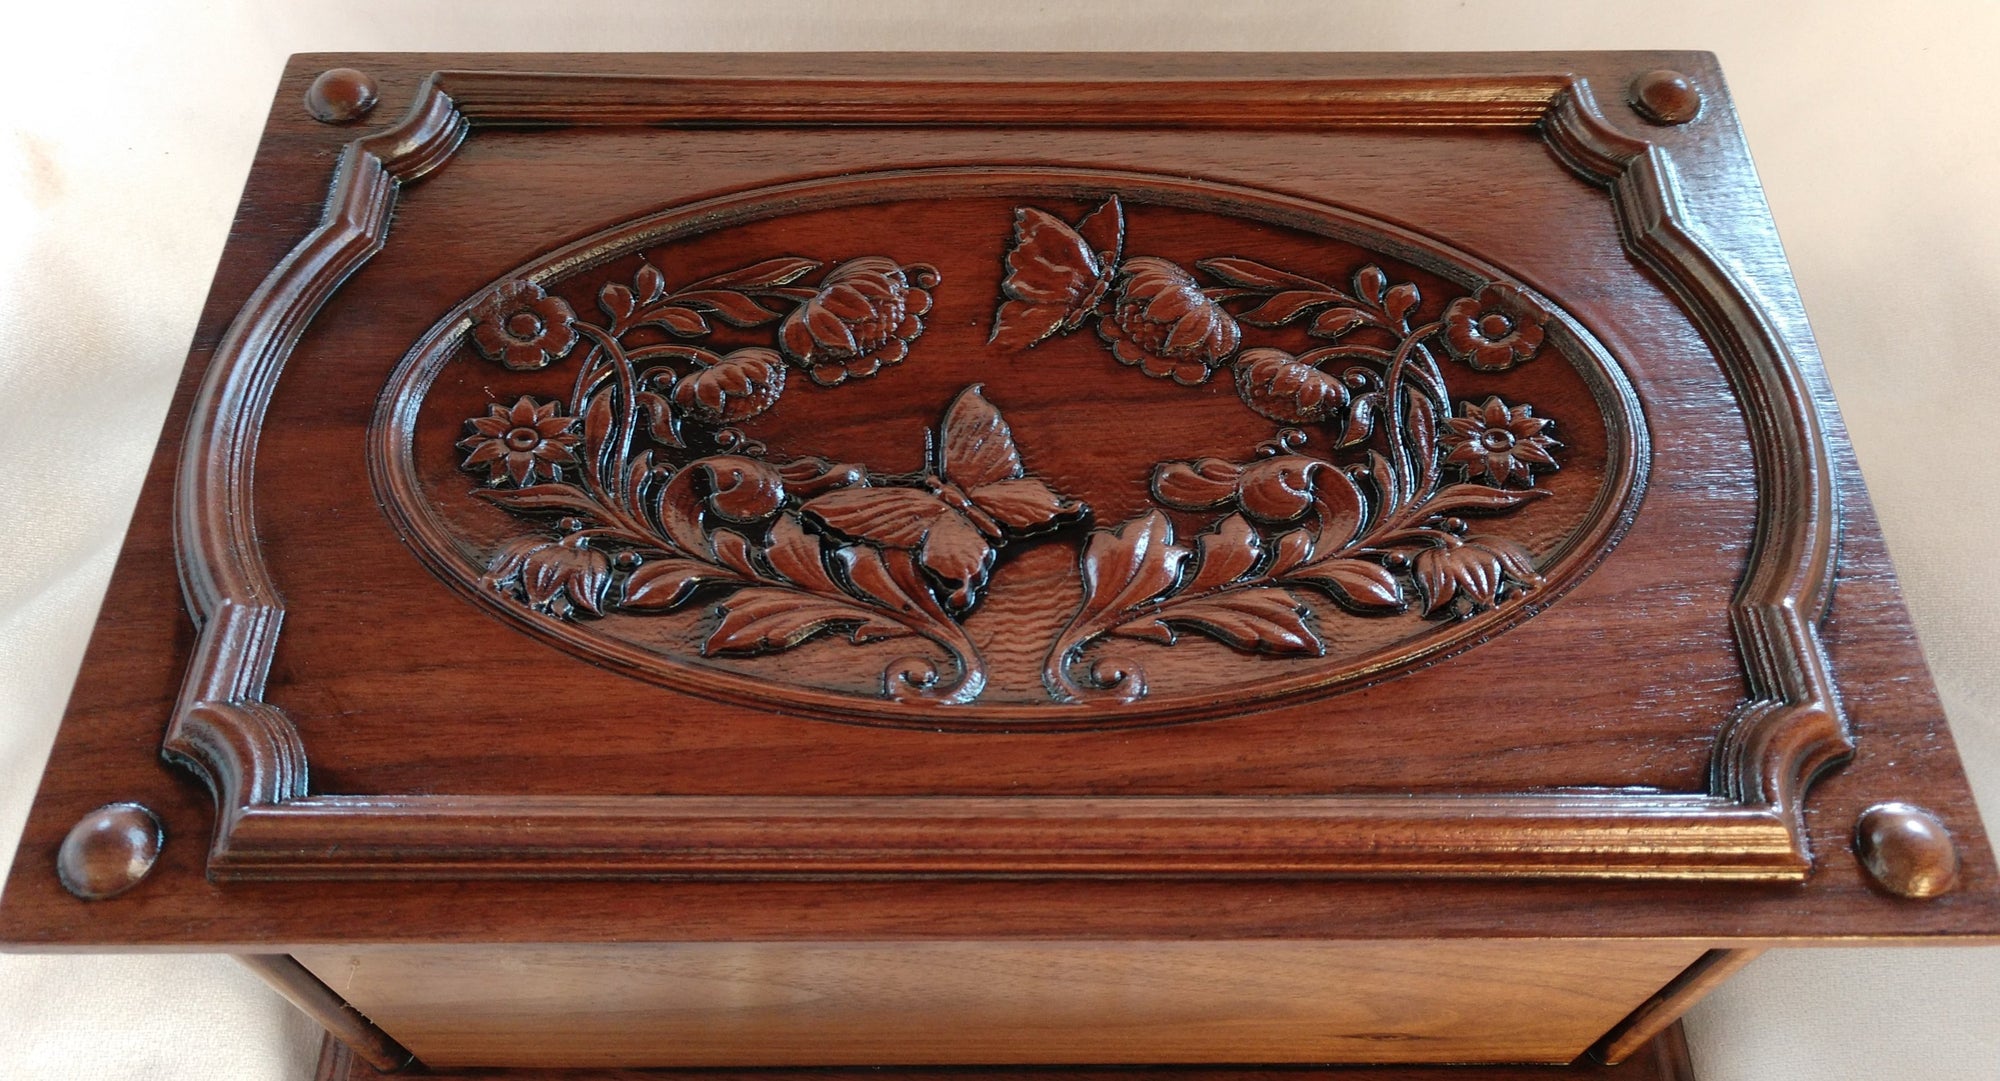 The top has carved images of butterflies and flowers surrounded by an ornate border • Beaded corners with molded edges Human ash urn for sale - elegant and dignified urn for storing cremated remains.